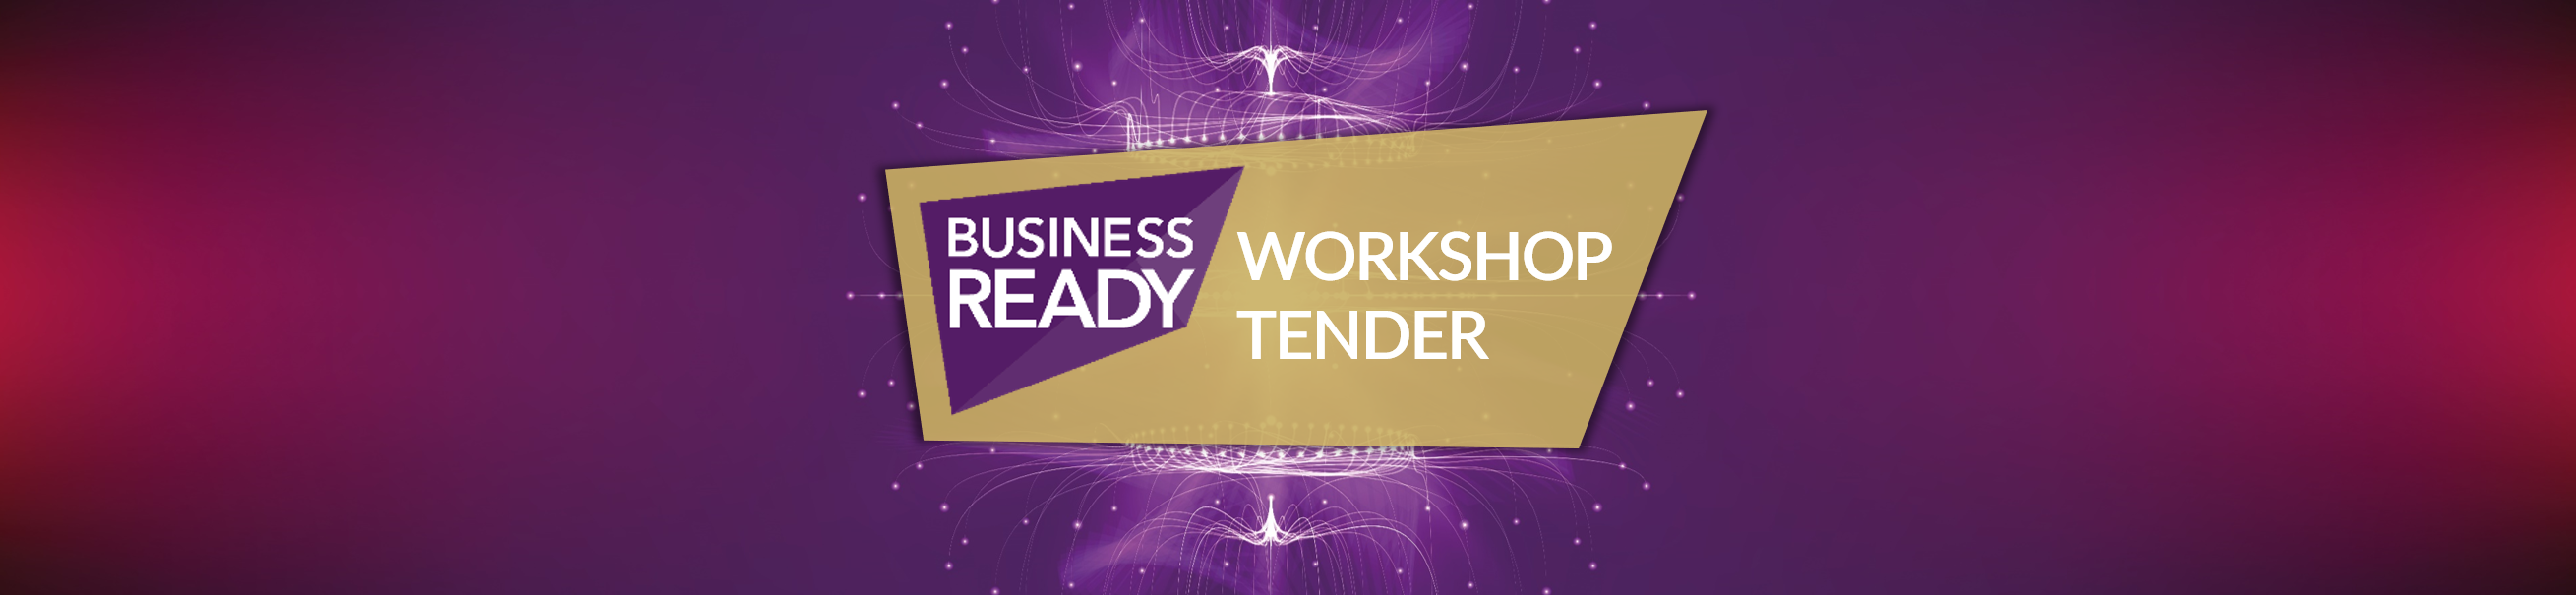 Business Ready invitation to tender for workshops